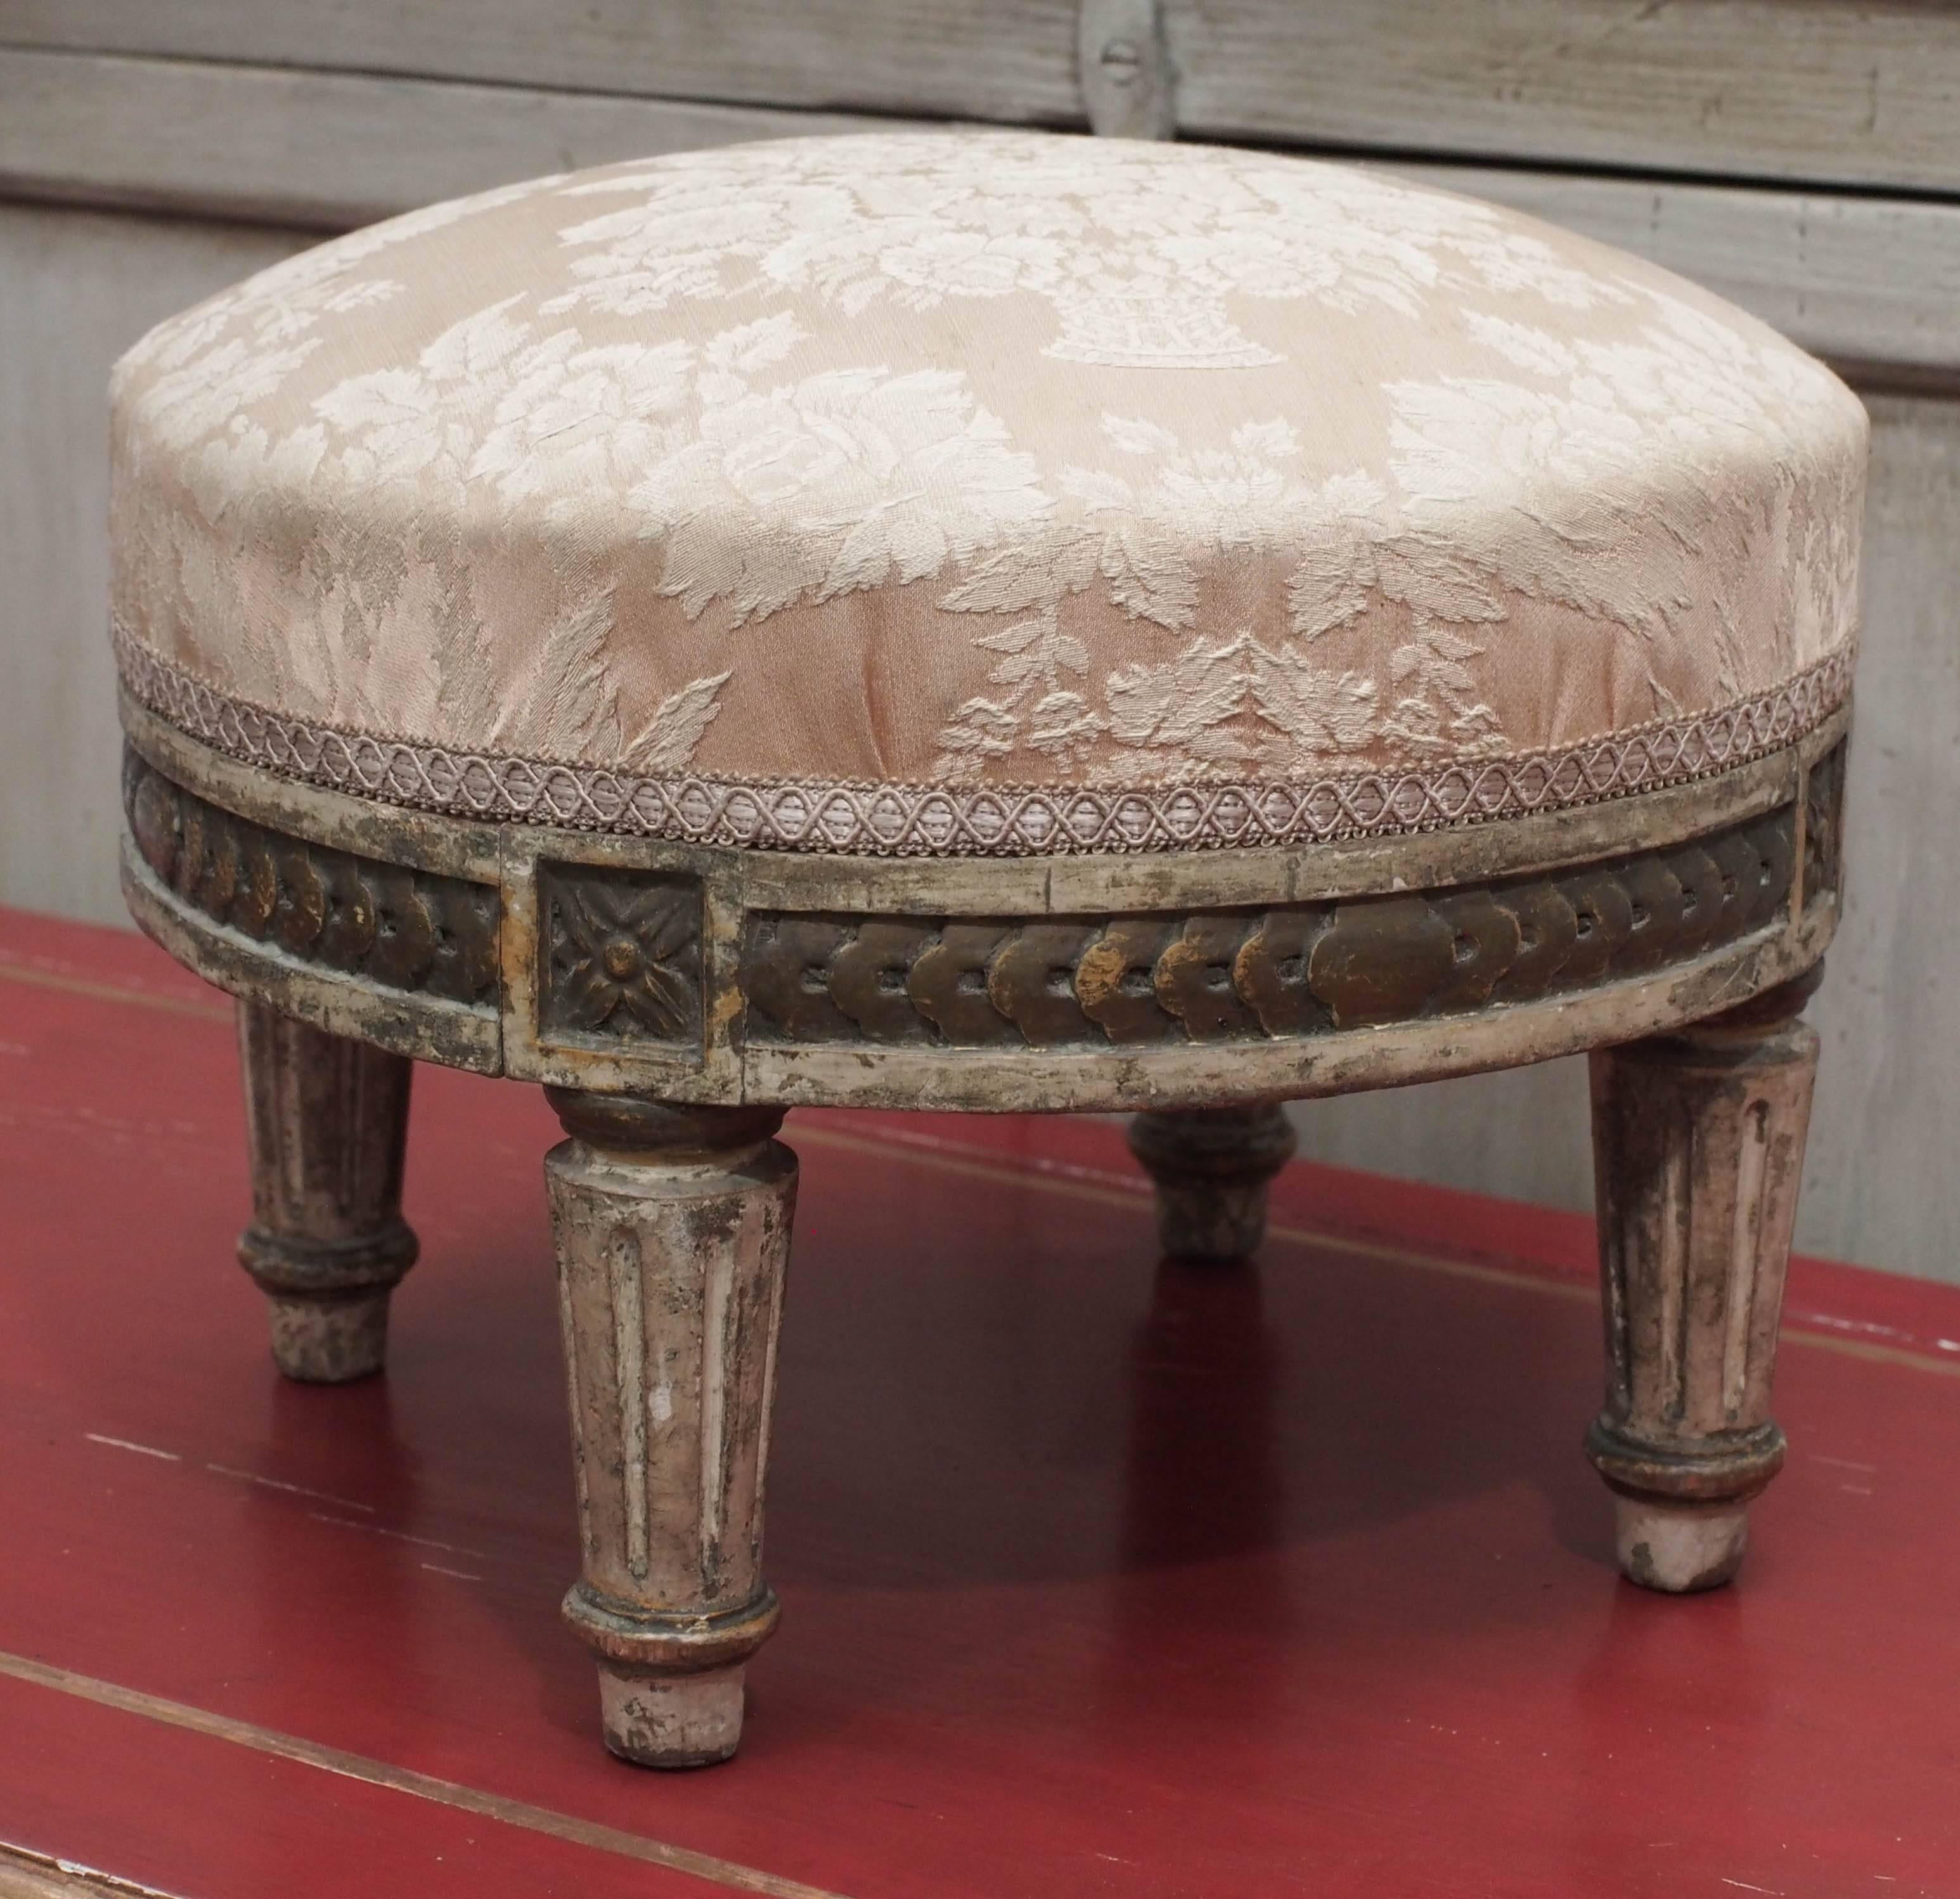 Pair of petite French Louis XVI style footstools or ottomans. Carved and upholstered. Some traces of original paint. Most likely dating to the early 19th century.